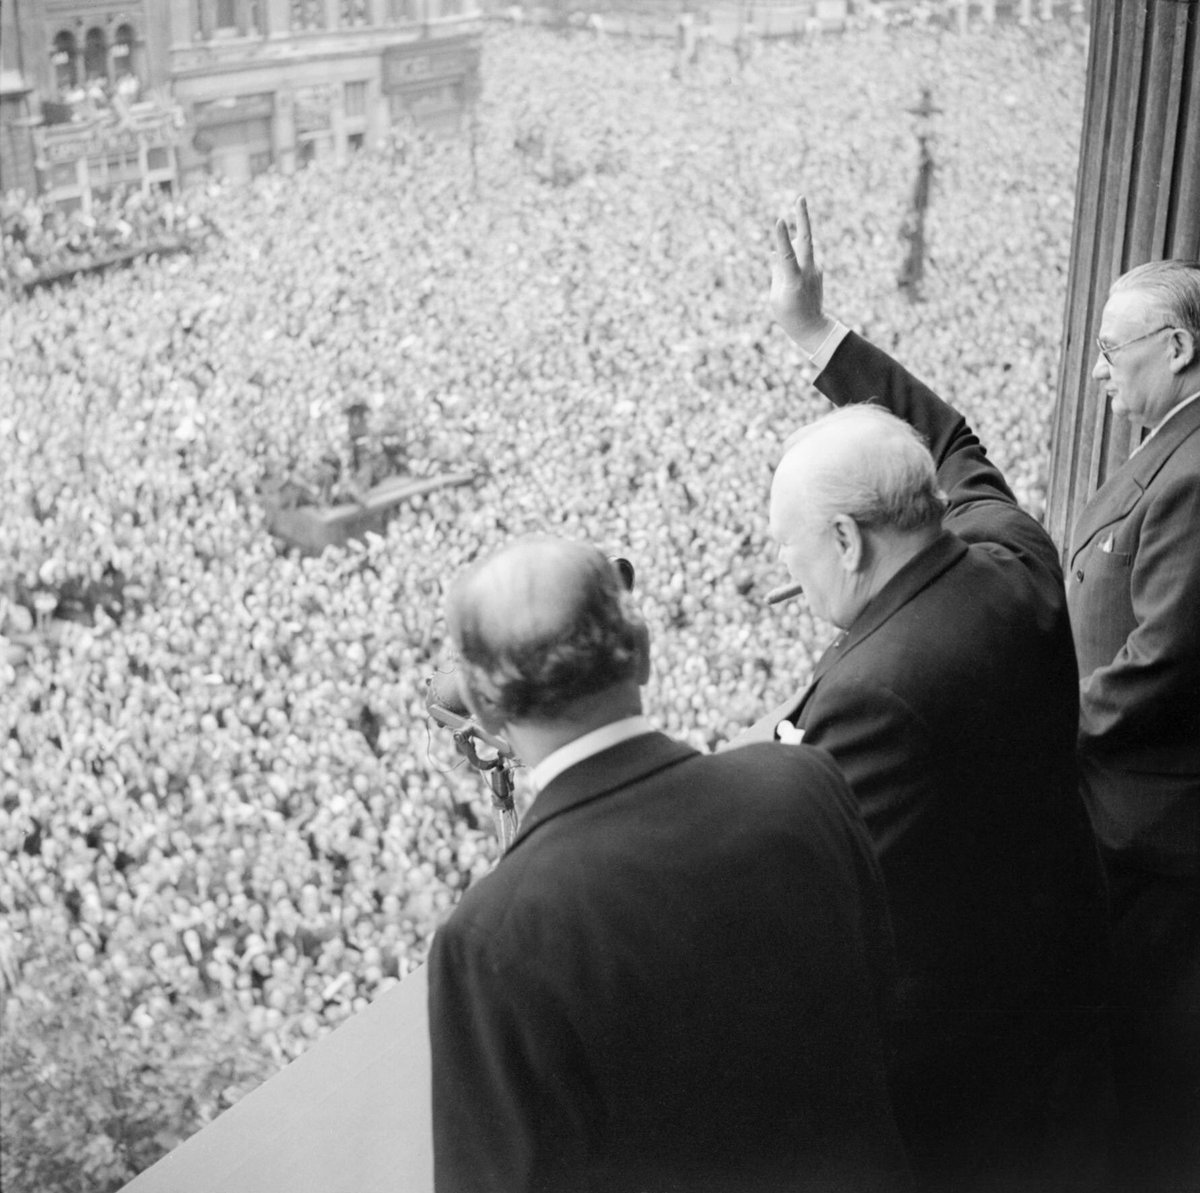 On this day in 1945, victory in Europe is declared against Germany. #VEDay Winston Churchill broadcasts to the country, the Empire & the World on this unconditional Nazi surrender. In Churchill’s words, “Advance Britannia. Long Live the Cause of Freedom. God Save The King!”